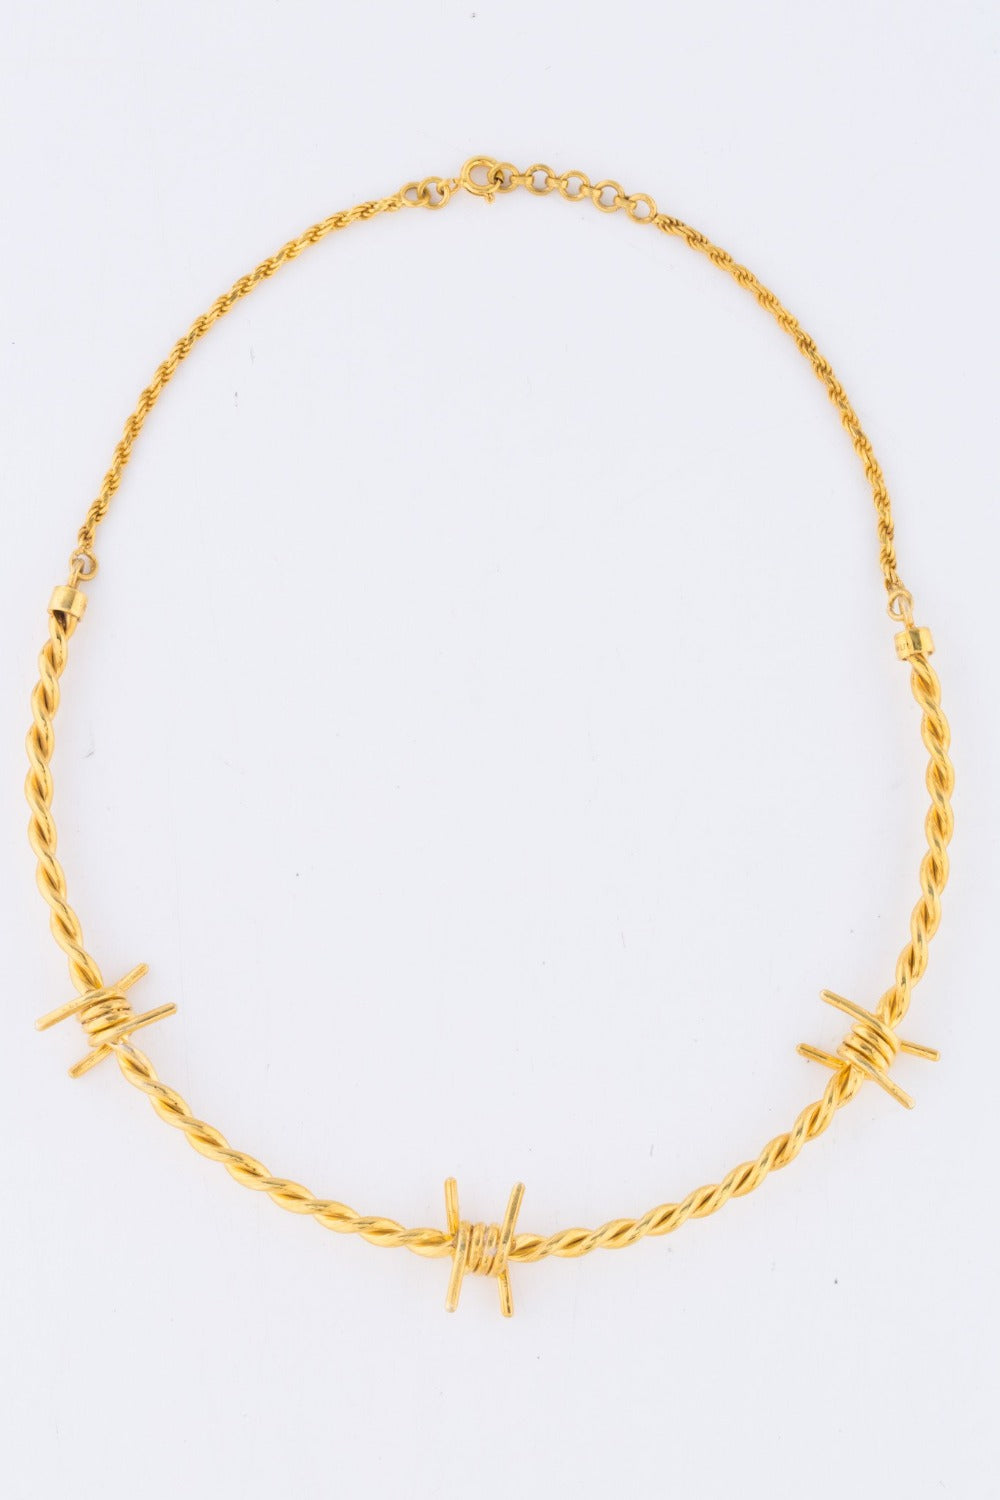 The Kabul House Essential Barb Wire Choker - Blingistan, gold plated necklace.